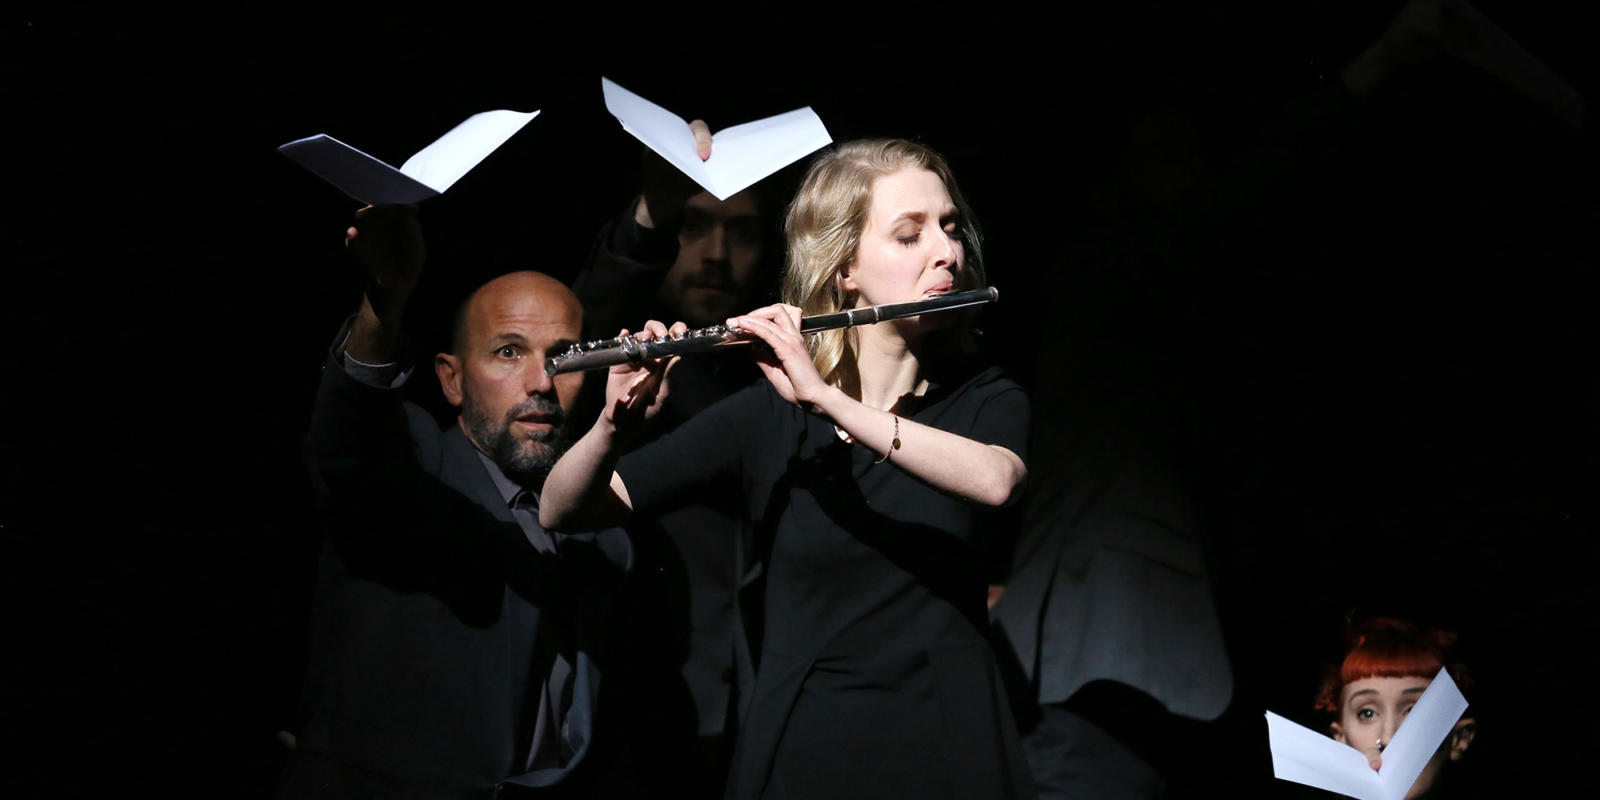 Blonde woman playing the flute on stage